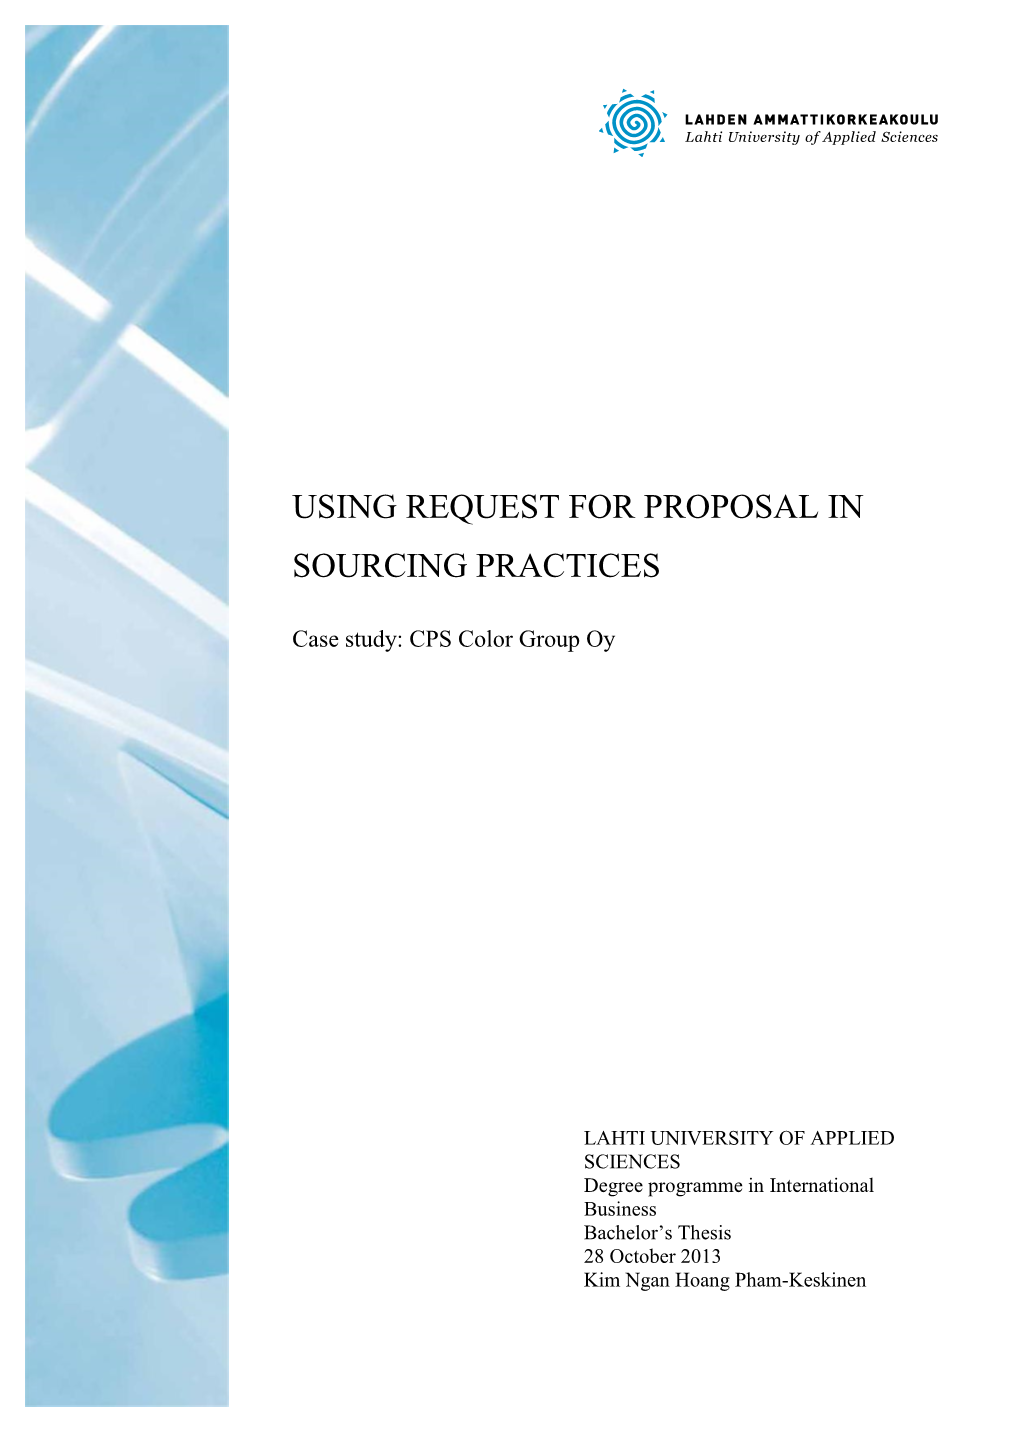 Using Request for Proposal in Sourcing Practices